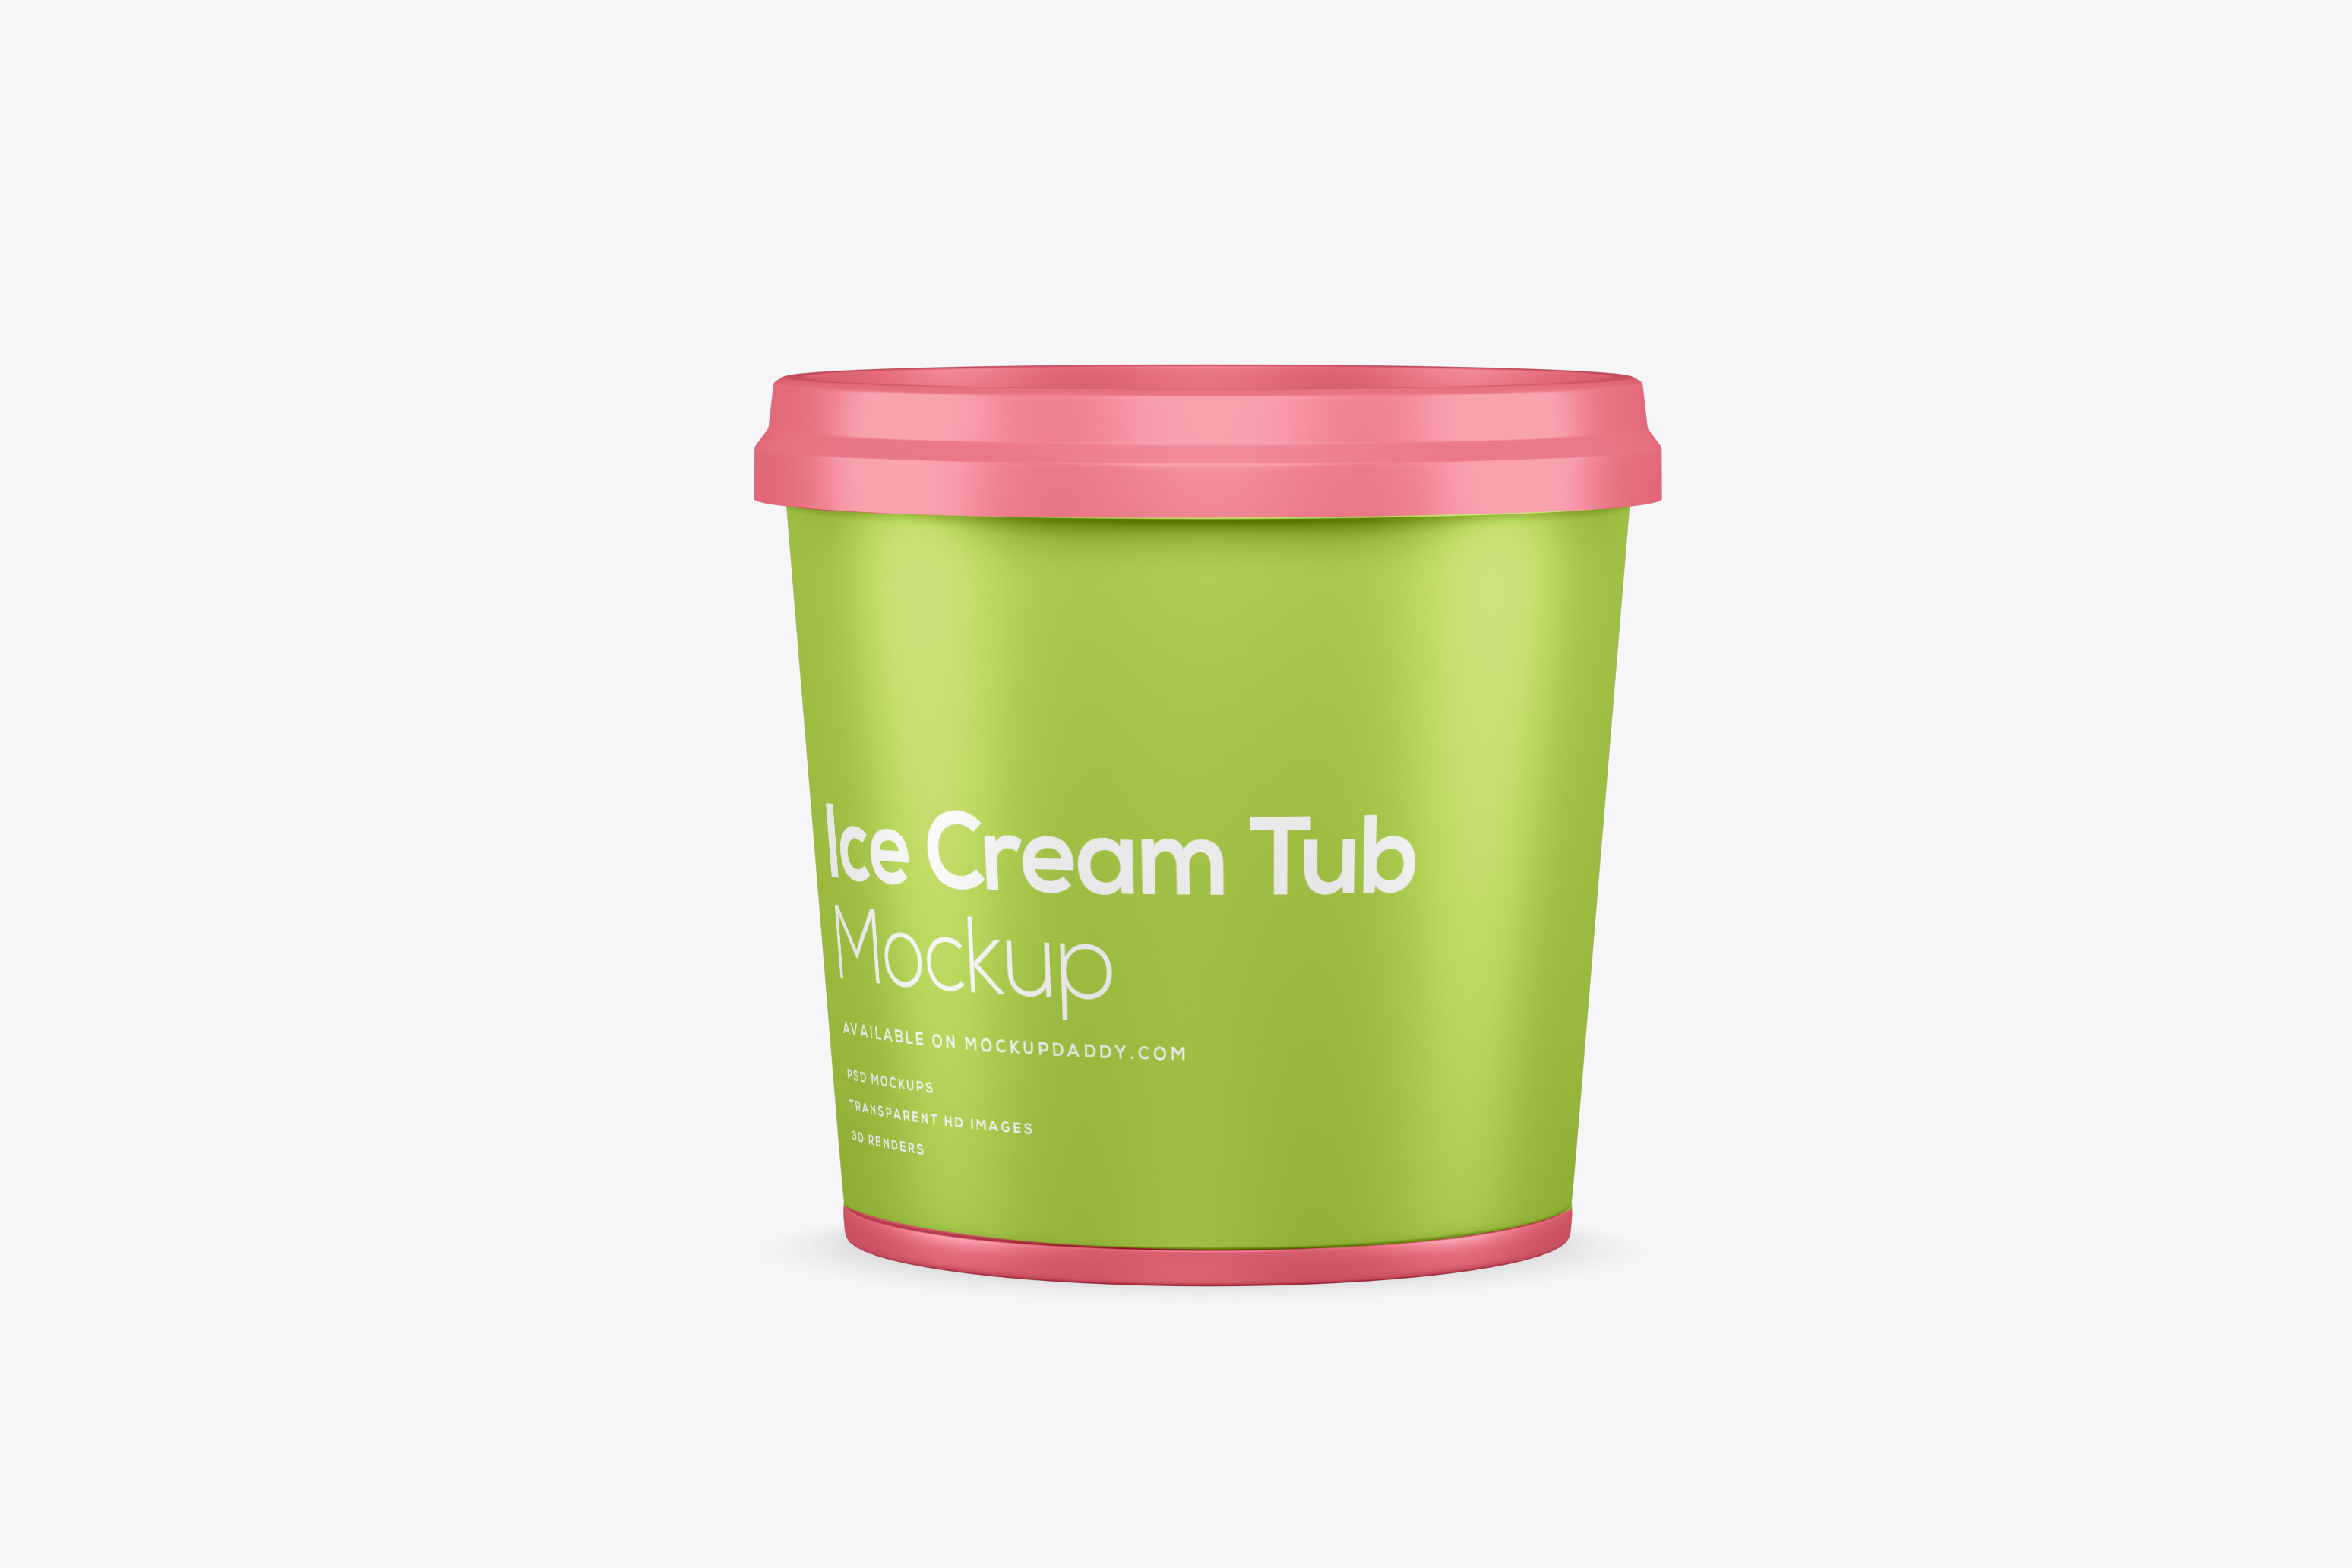 Pink lidded ice cream tub mockup in PSD format.